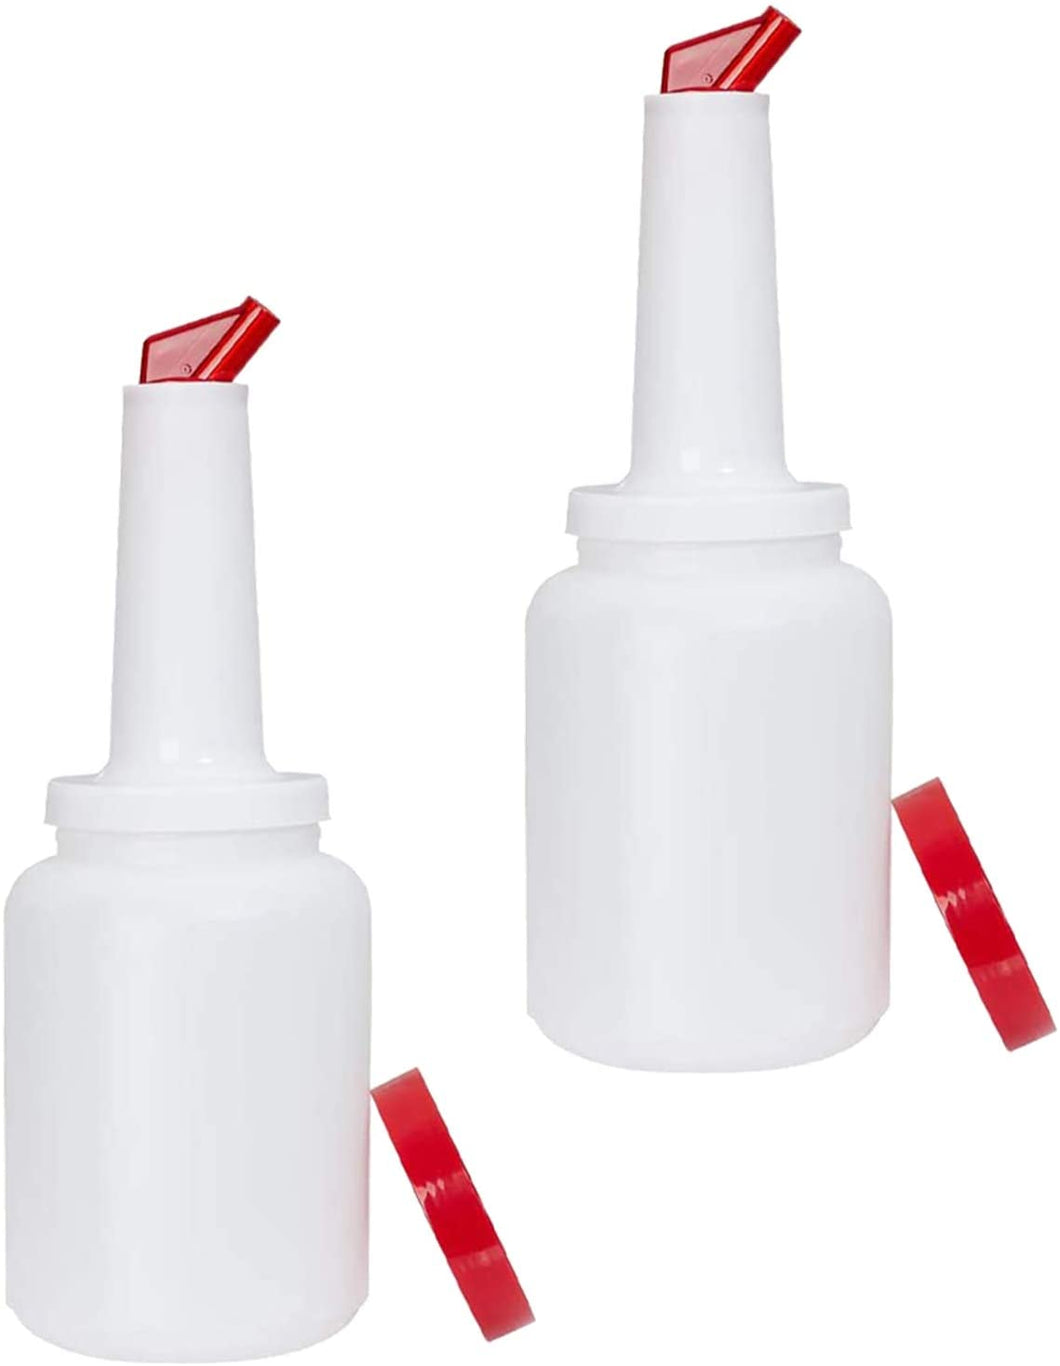 https://giftsplaza.com/cdn/shop/products/2-Quart-Storer-and-Pourer-White-Bottle-for-Alcohol-or-Juice-With-Red-Lid-and-Pourer-Set-of-2-Pieces_530x@2x.jpg?v=1690780167